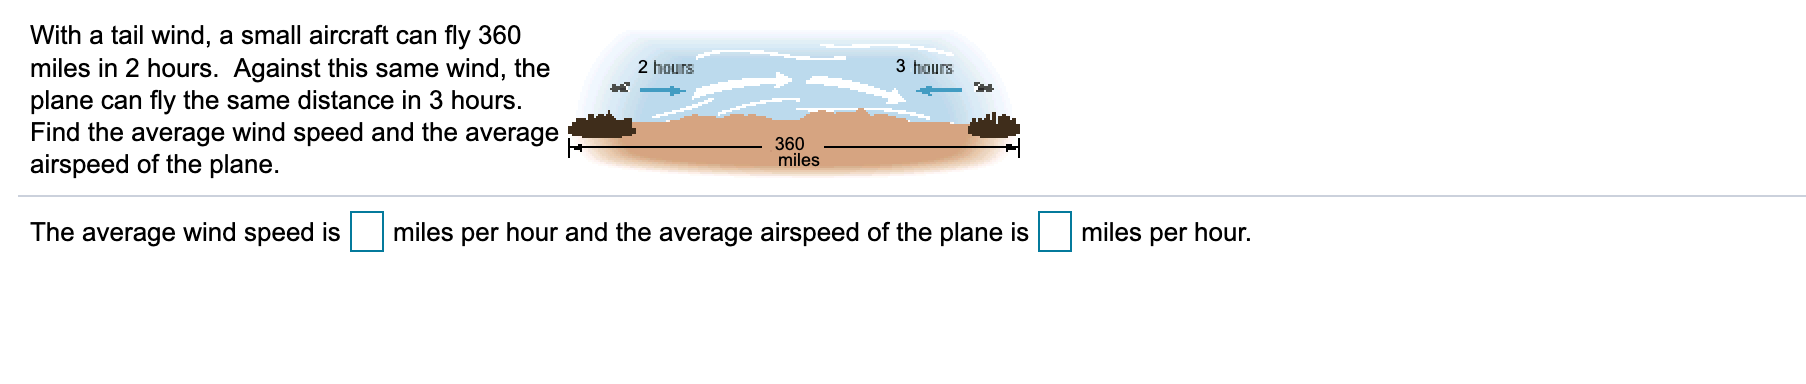 With a tail wind, a small aircraft can fly 360
miles in 2 hours. Against this same wind, the
plane can fly the same distance in 3 hours.
Find the average wind speed and the average
airspeed of the plane.
2 hours
3 hours
360
miles
The average wind speed is
miles per hour and the average airspeed of the plane is
miles per hour.
